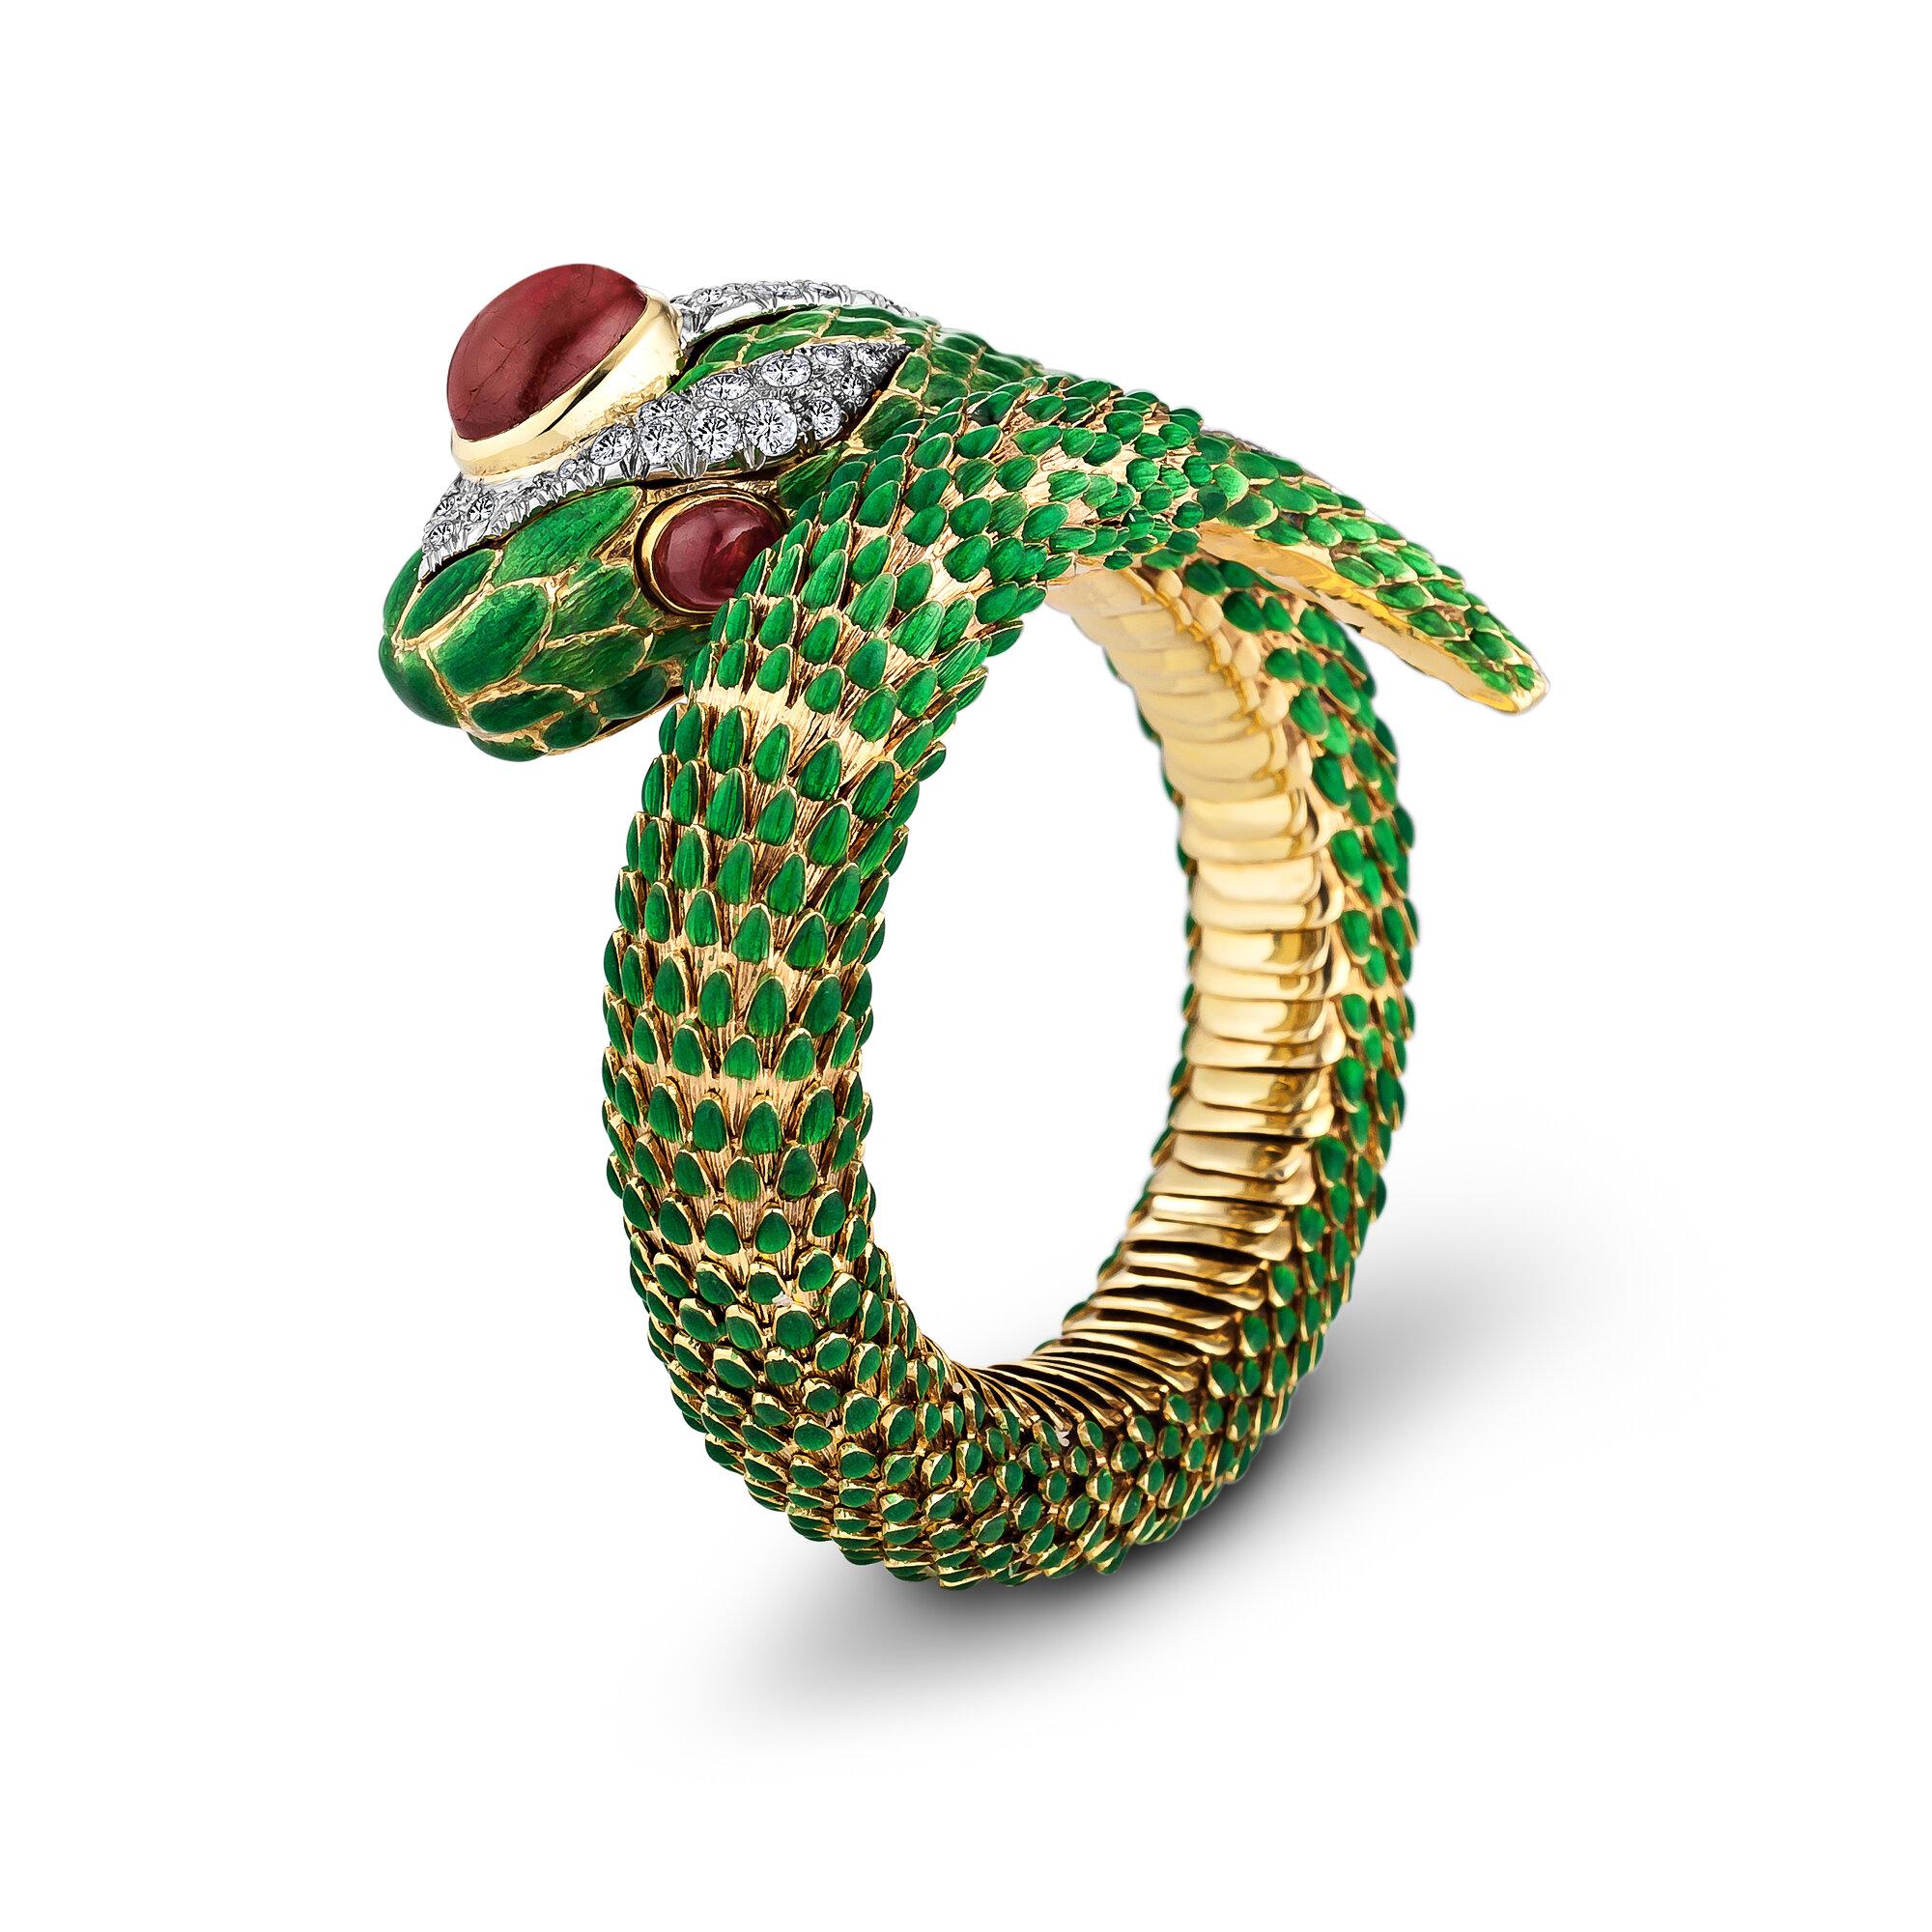 Serpents seasonally shed their skins symbolizing transformation, immortality, and the eternal renewal of life, and when wearing this extraordinary David Webb snake cuff bracelet you too will be ready for the next exciting chapter.  Handmade in the